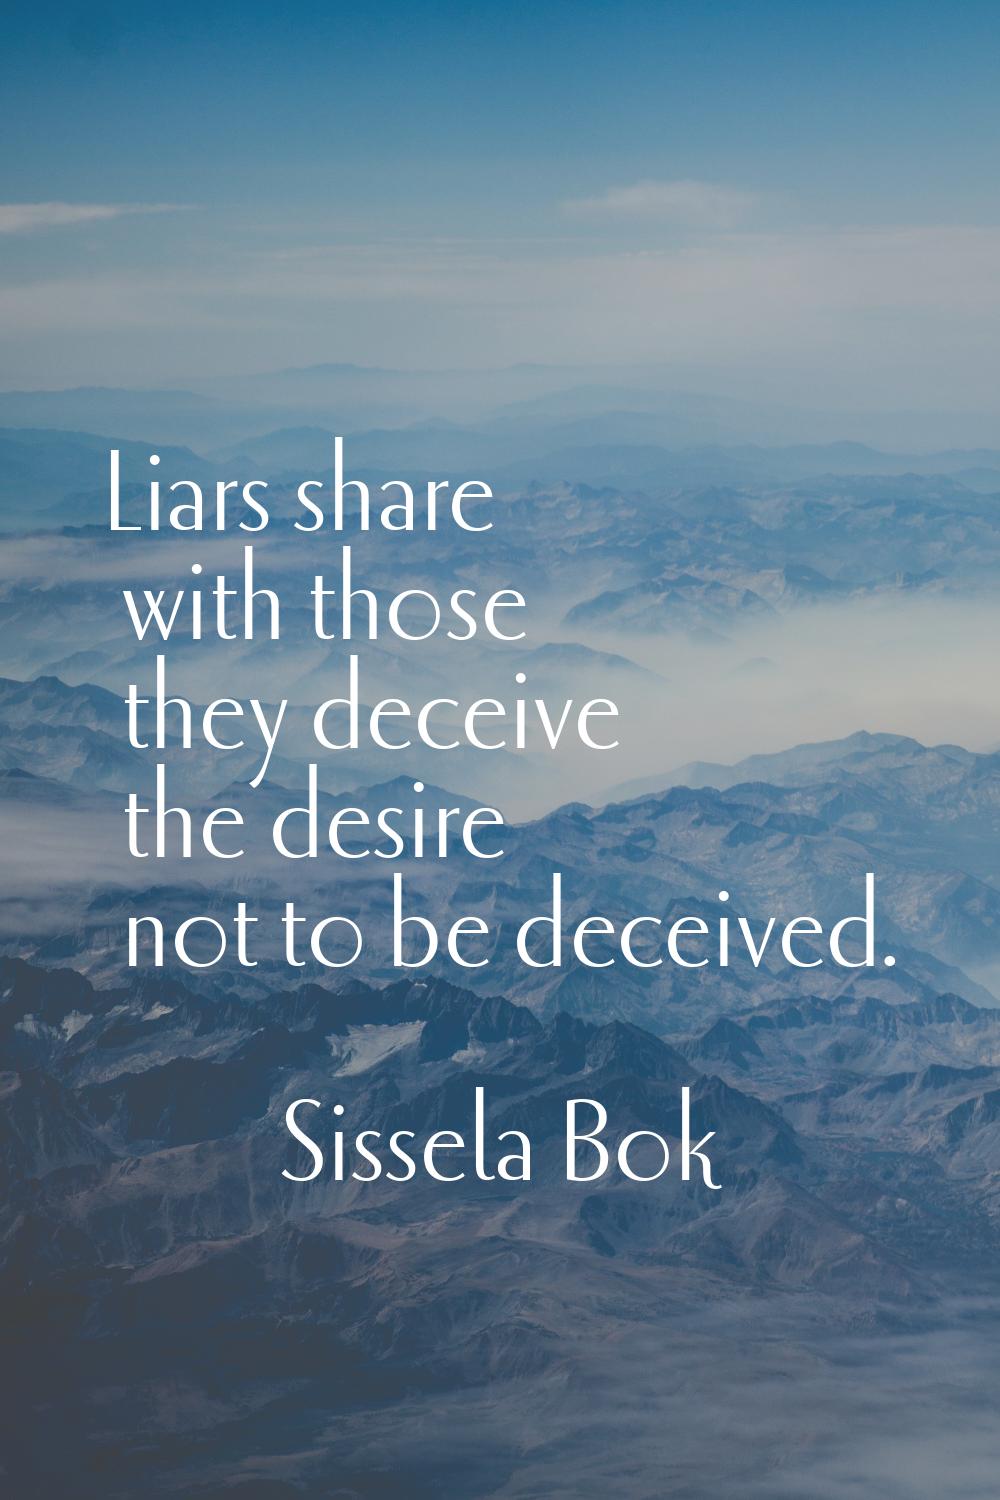 Liars share with those they deceive the desire not to be deceived.